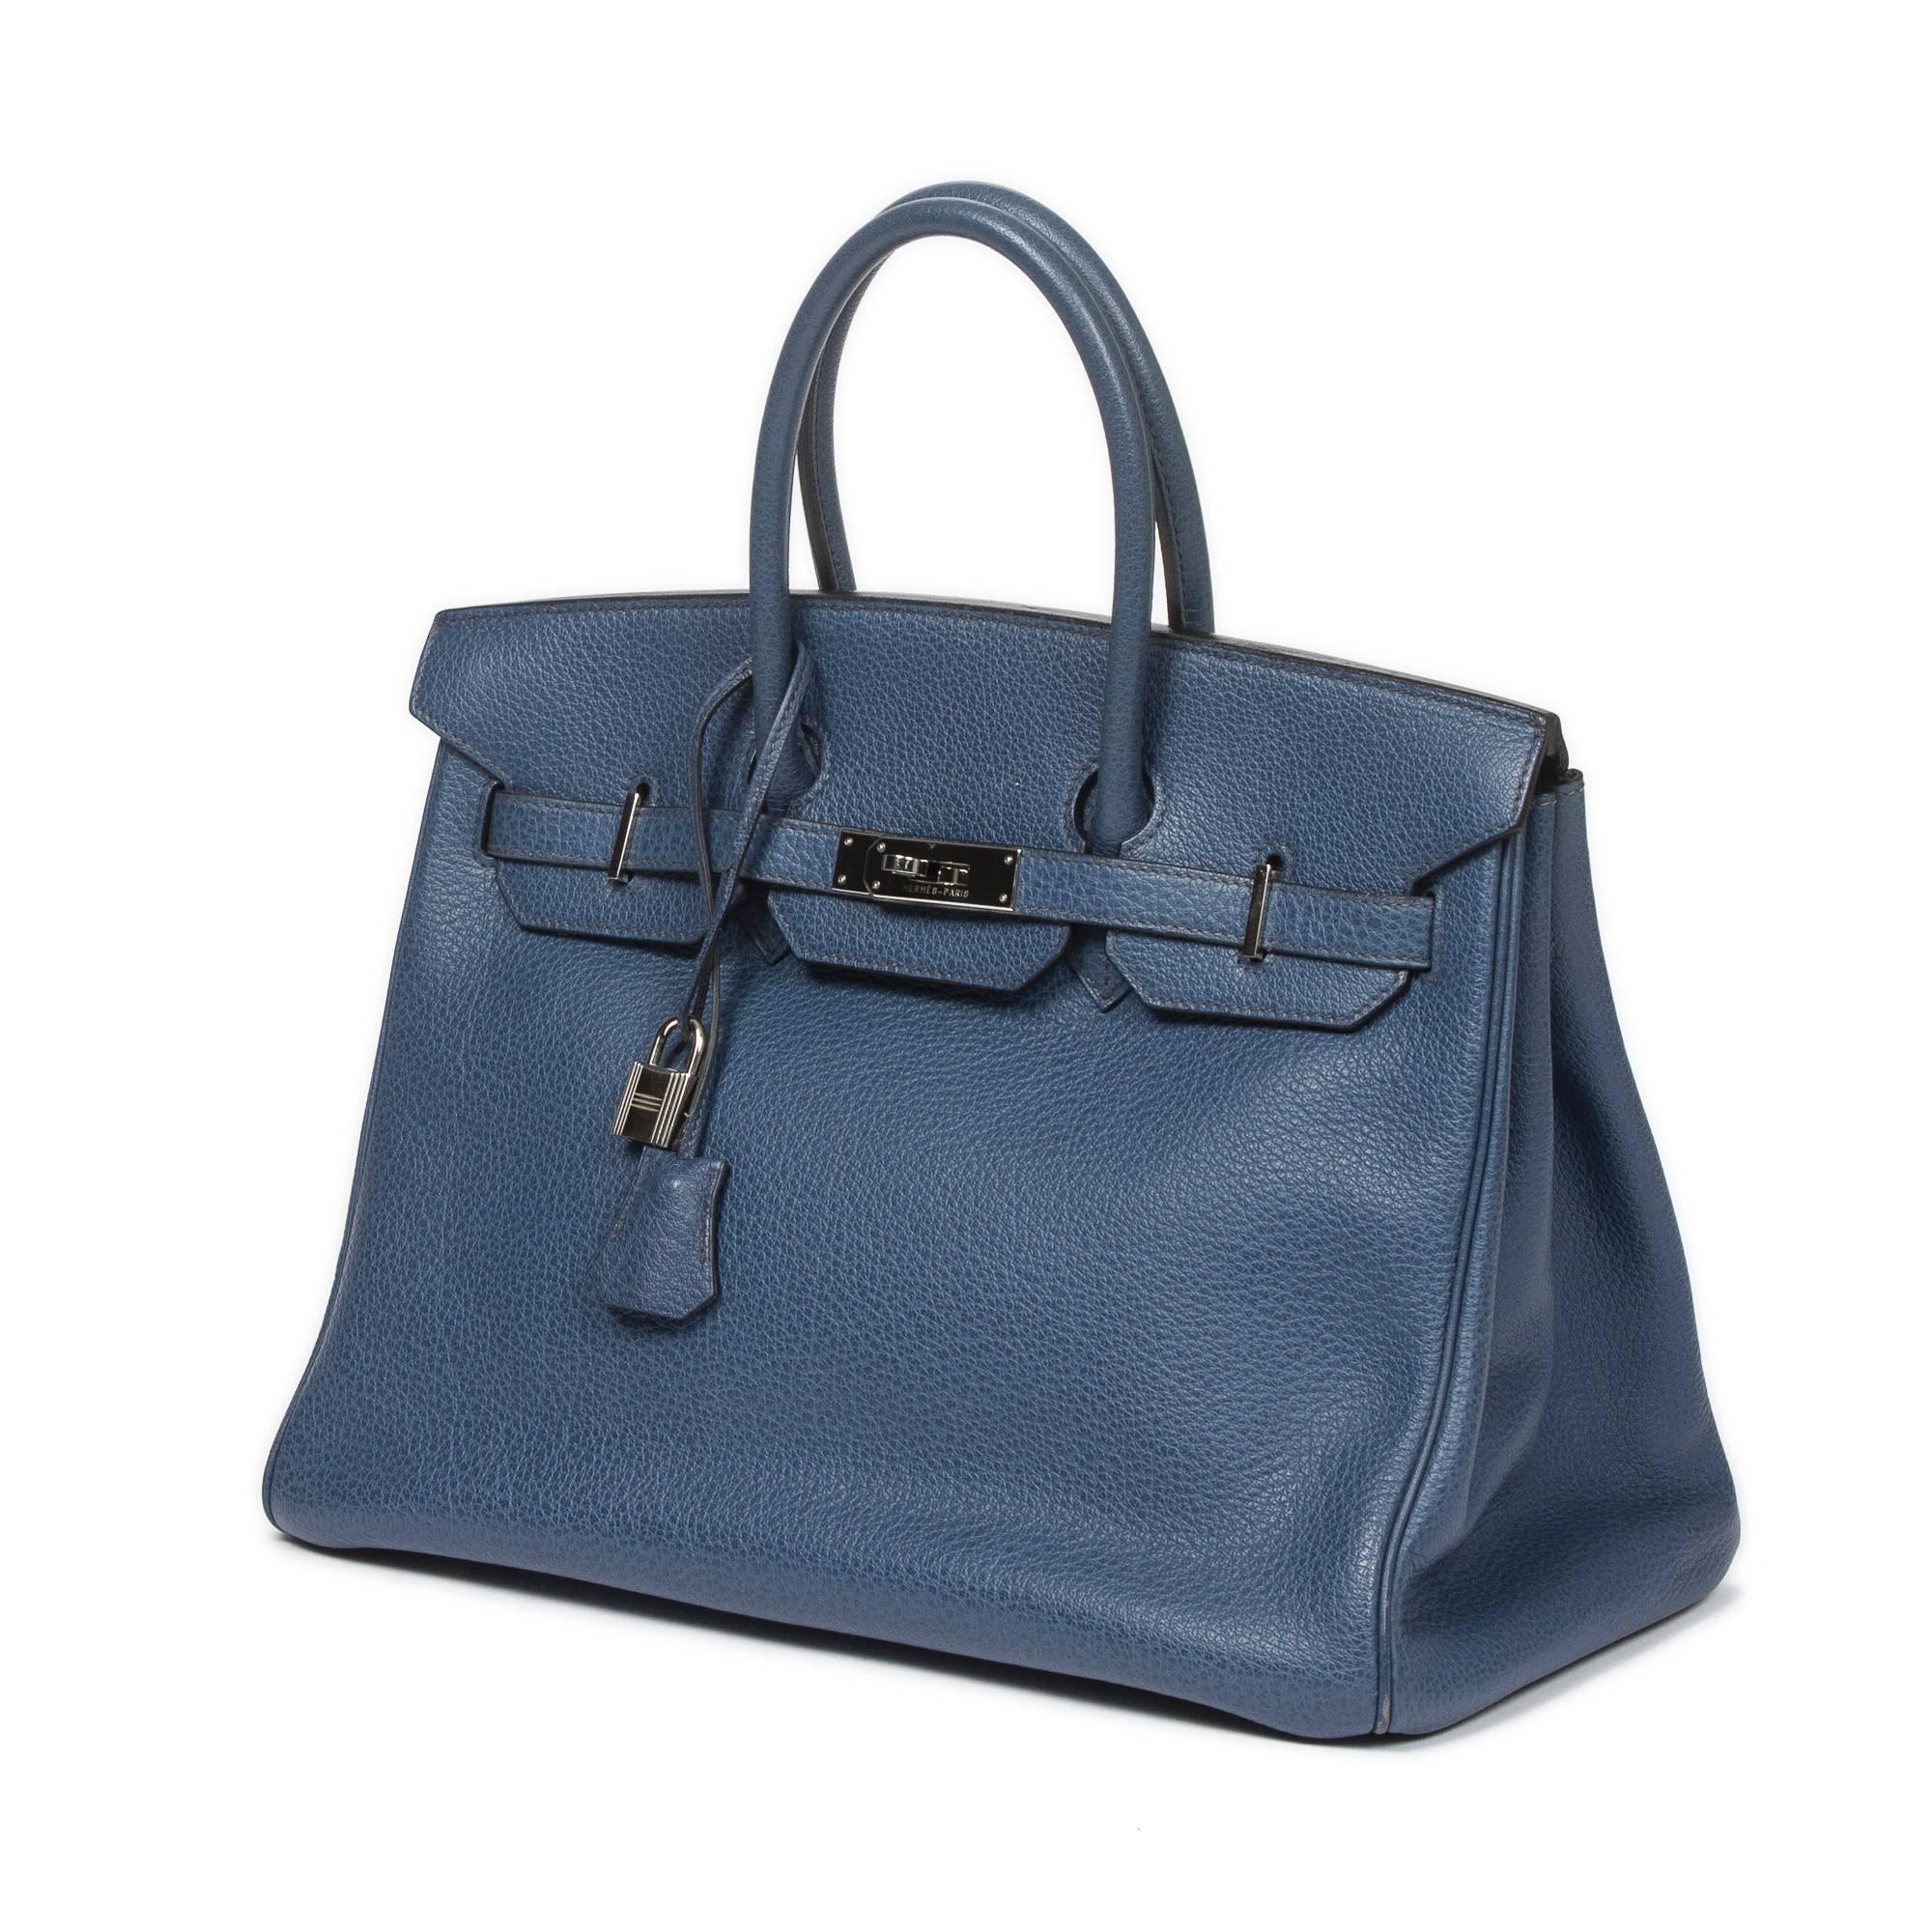 Birkin 35 in blue Buffalo leather with cadenas and keys in clochette, silver tone hardware. Blue Buffalo leather lined interior with one slip pocket and one zip pocket. Stamp I in square. Model from 2005. There are scuffs on the corners, few white